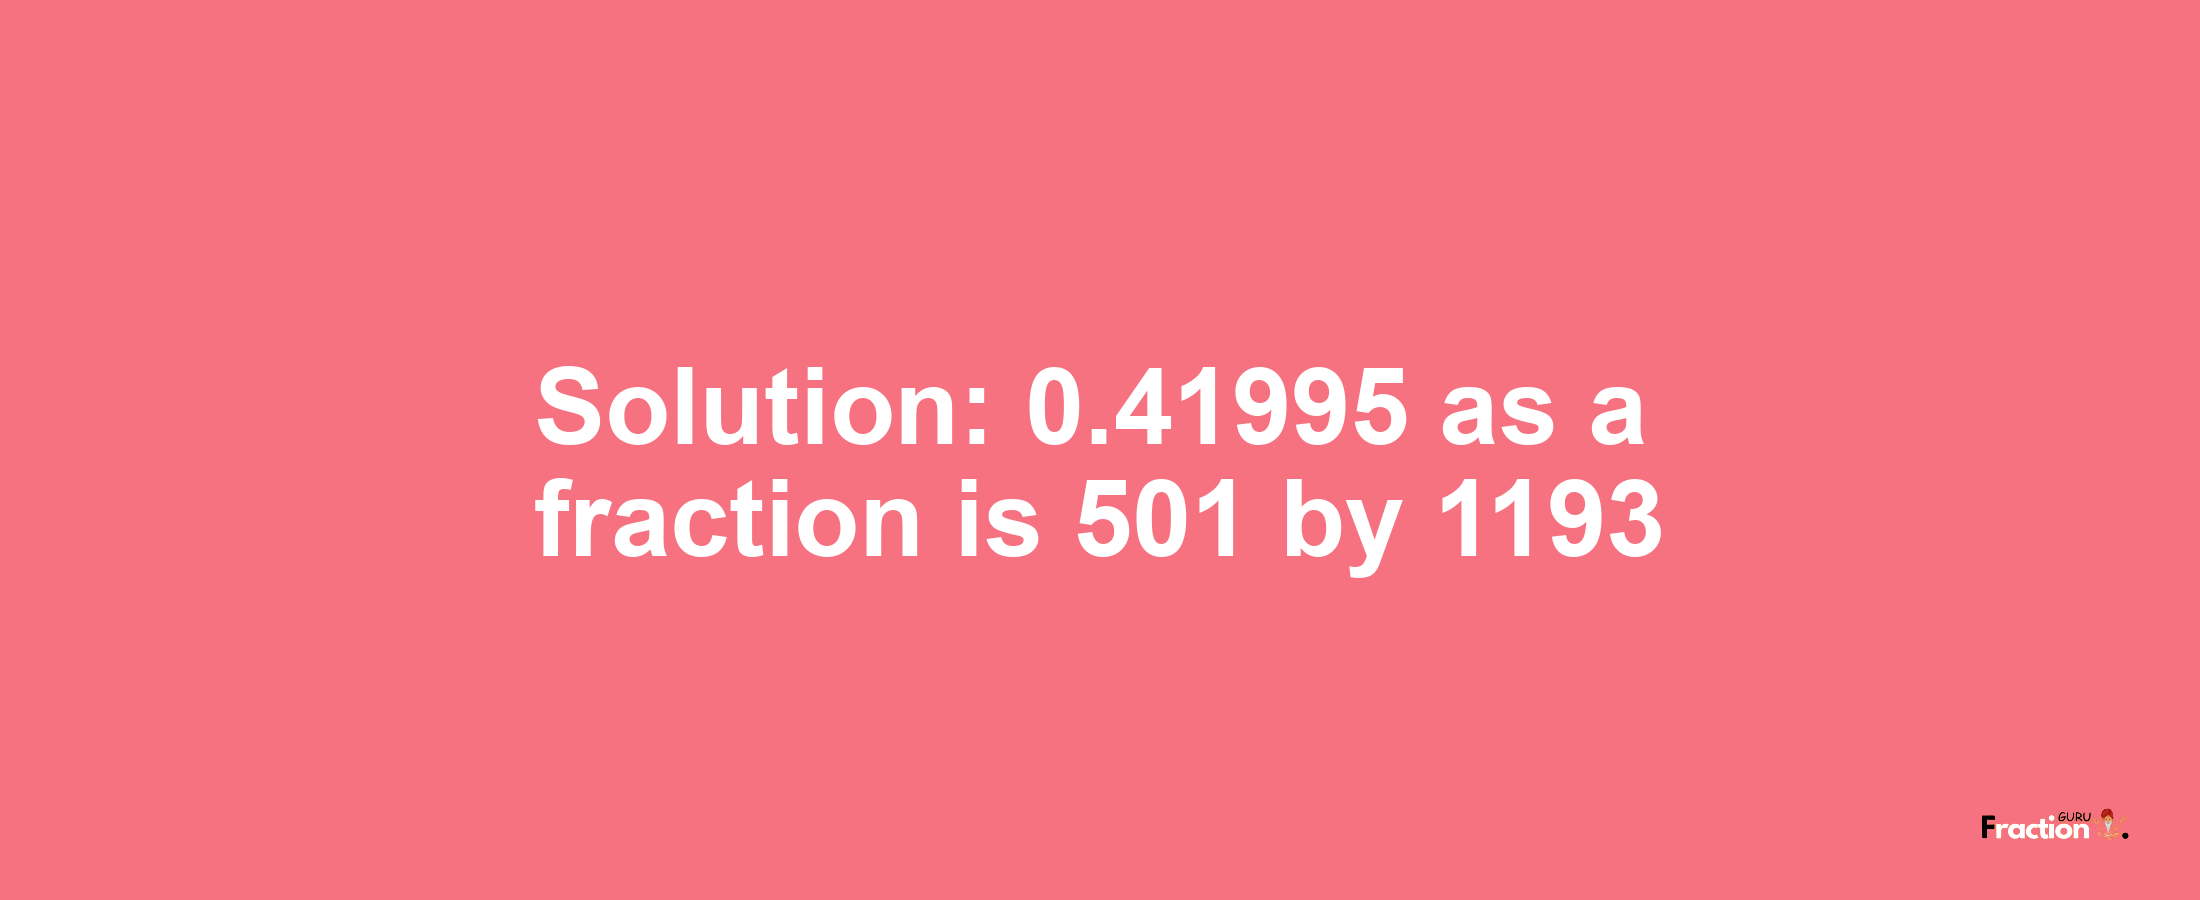 Solution:0.41995 as a fraction is 501/1193